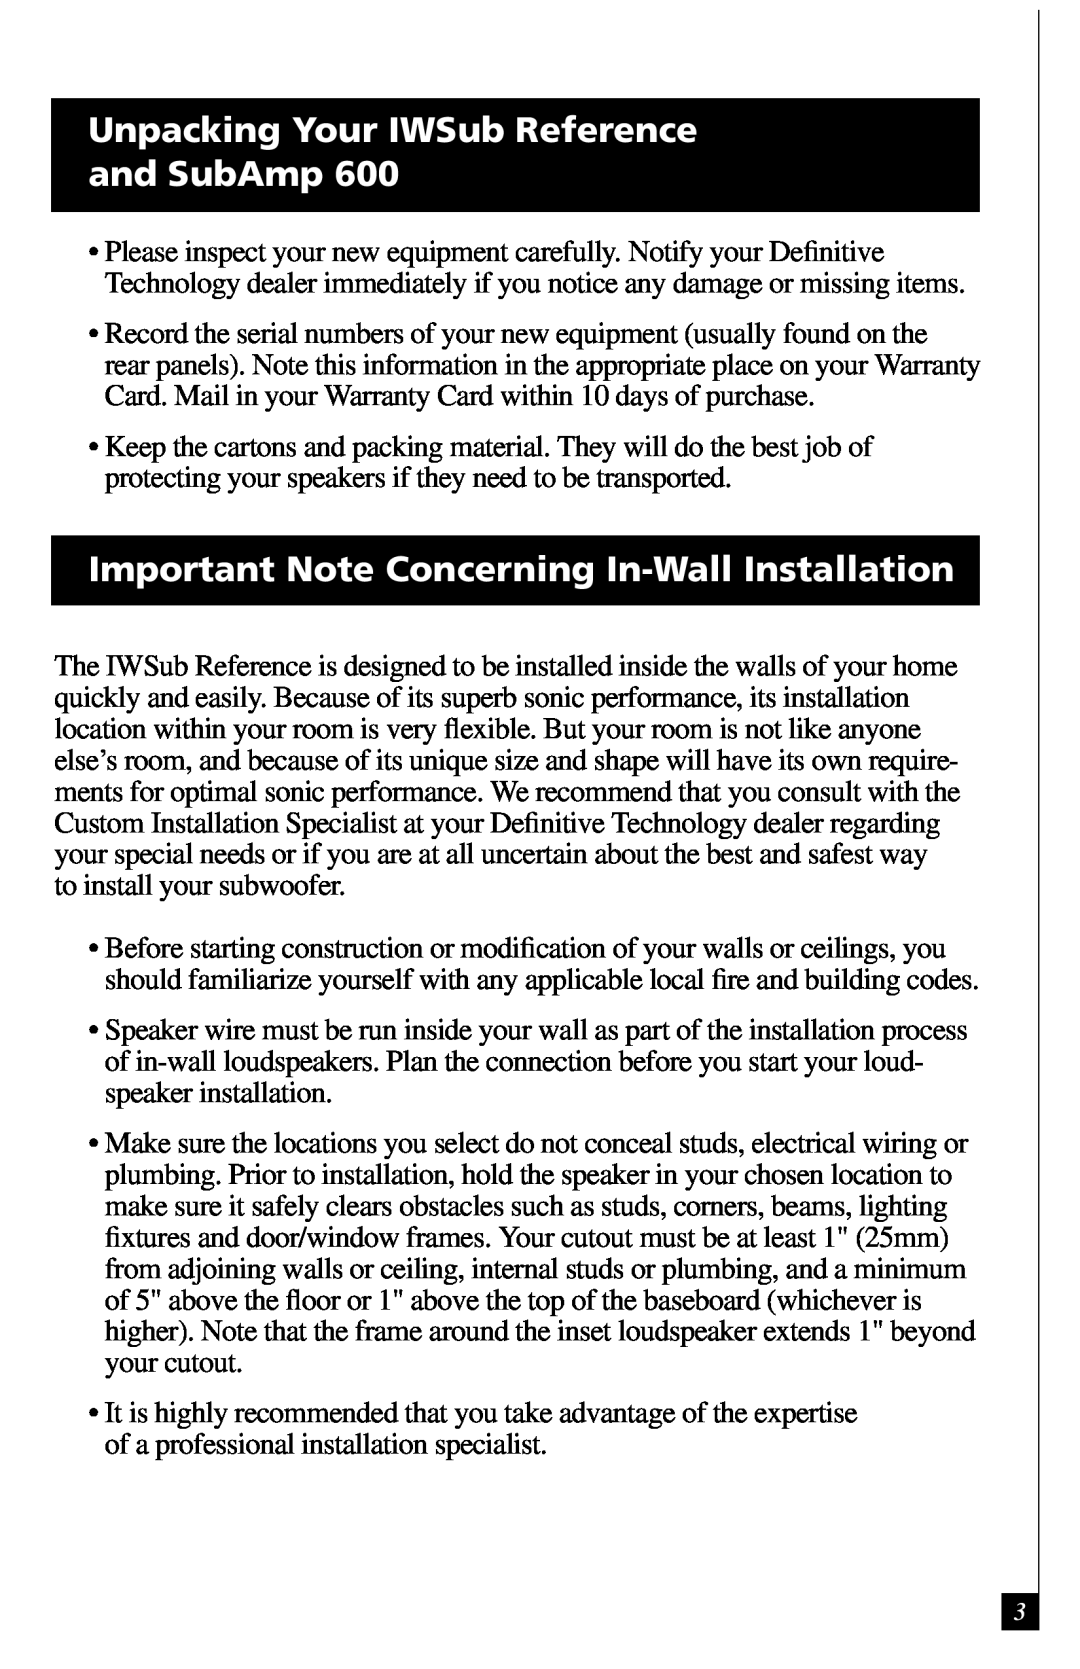 Definitive Technology 600 Unpacking Your IWSub Reference and SubAmp, Important Note Concerning In-Wall Installation 